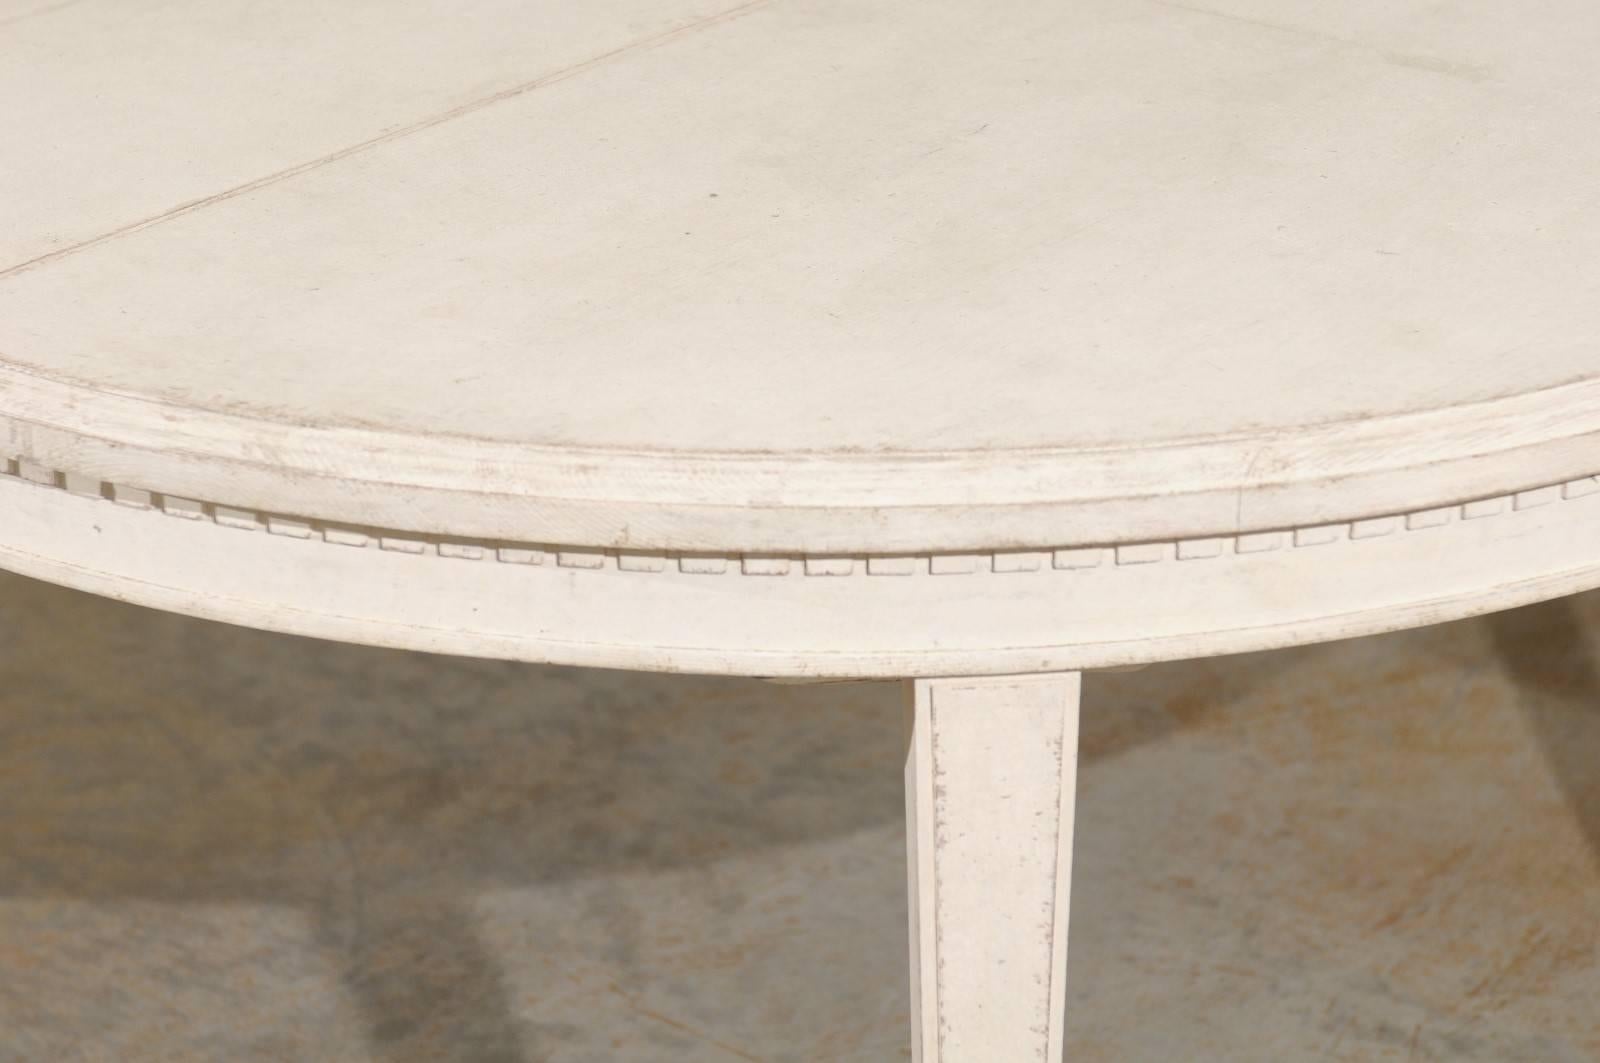 Painted Swedish Gustavian Style Oval Dining Room Table with Extensions and Tapered Legs